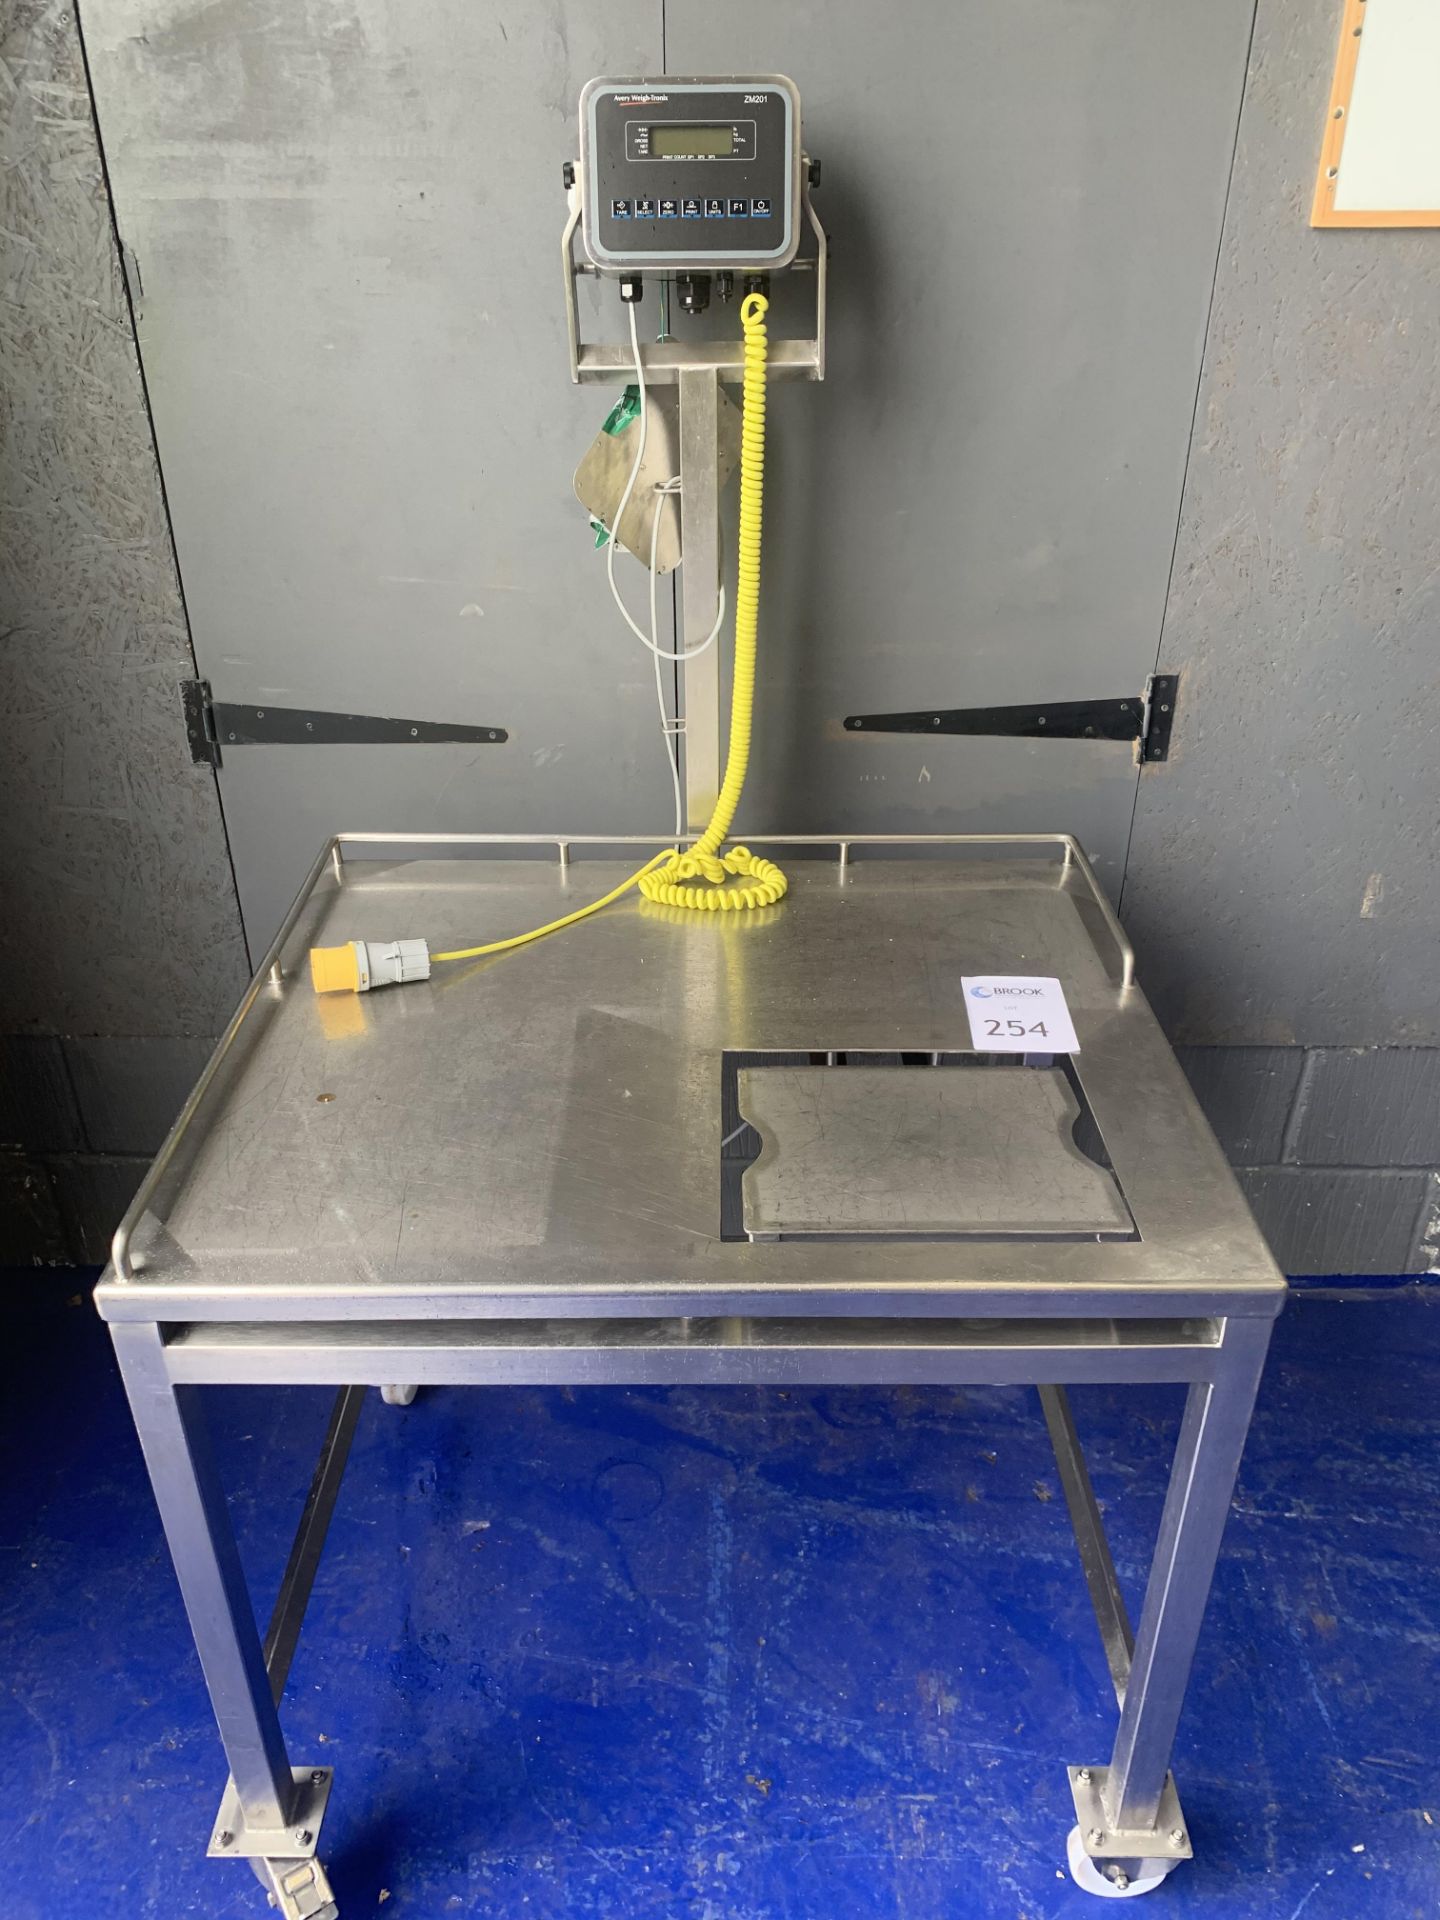 avery weigh tronics scales on stainless steel table system 110v - Image 2 of 2